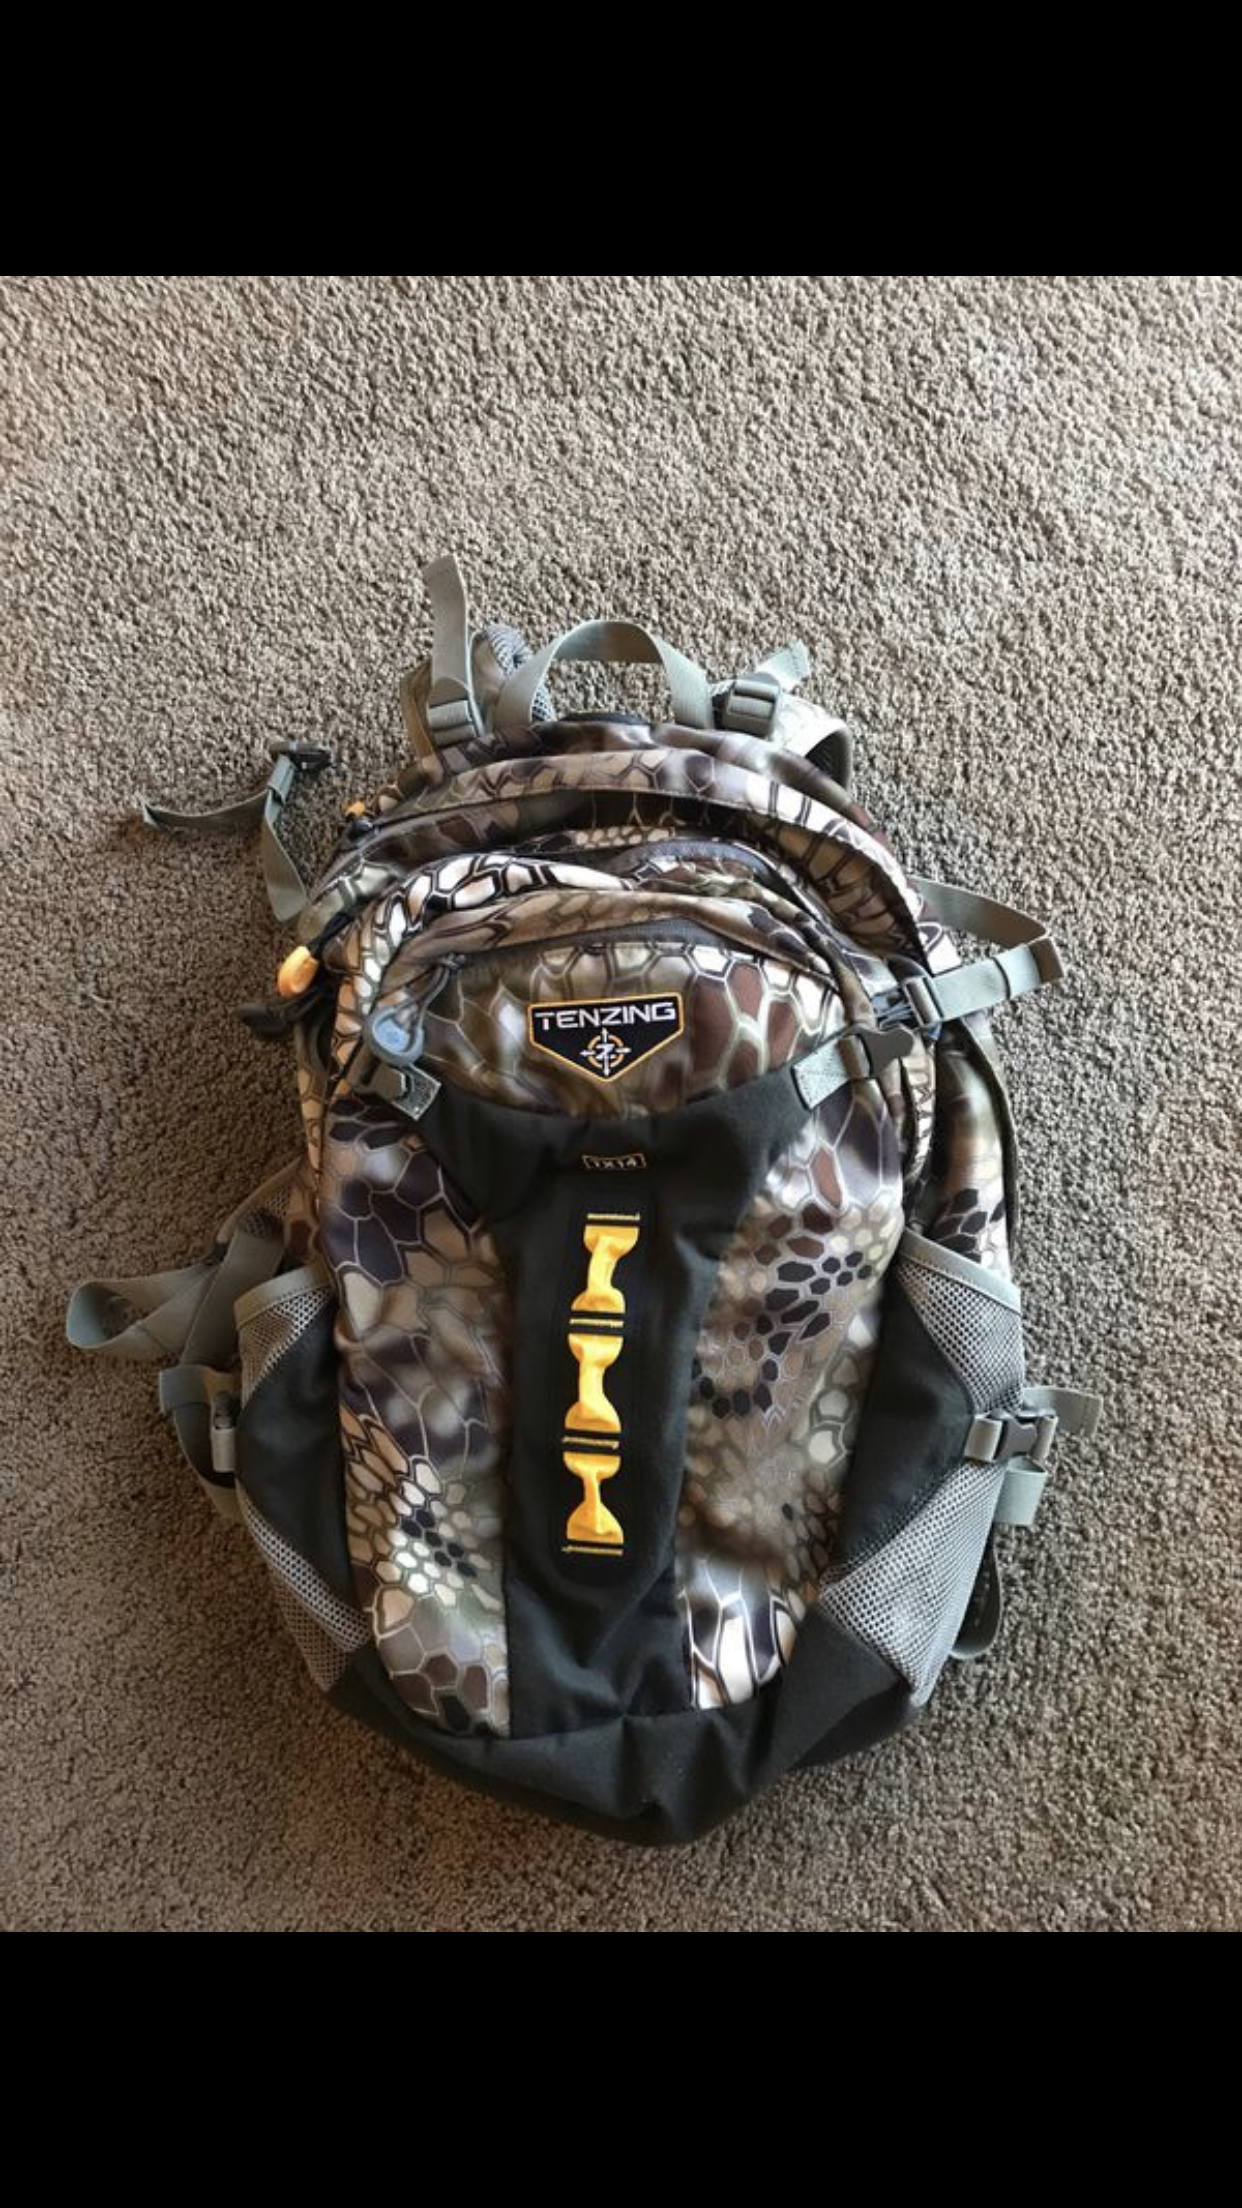 Tenzing Backpack - Classified Ads - CouesWhitetail.com Discussion forum